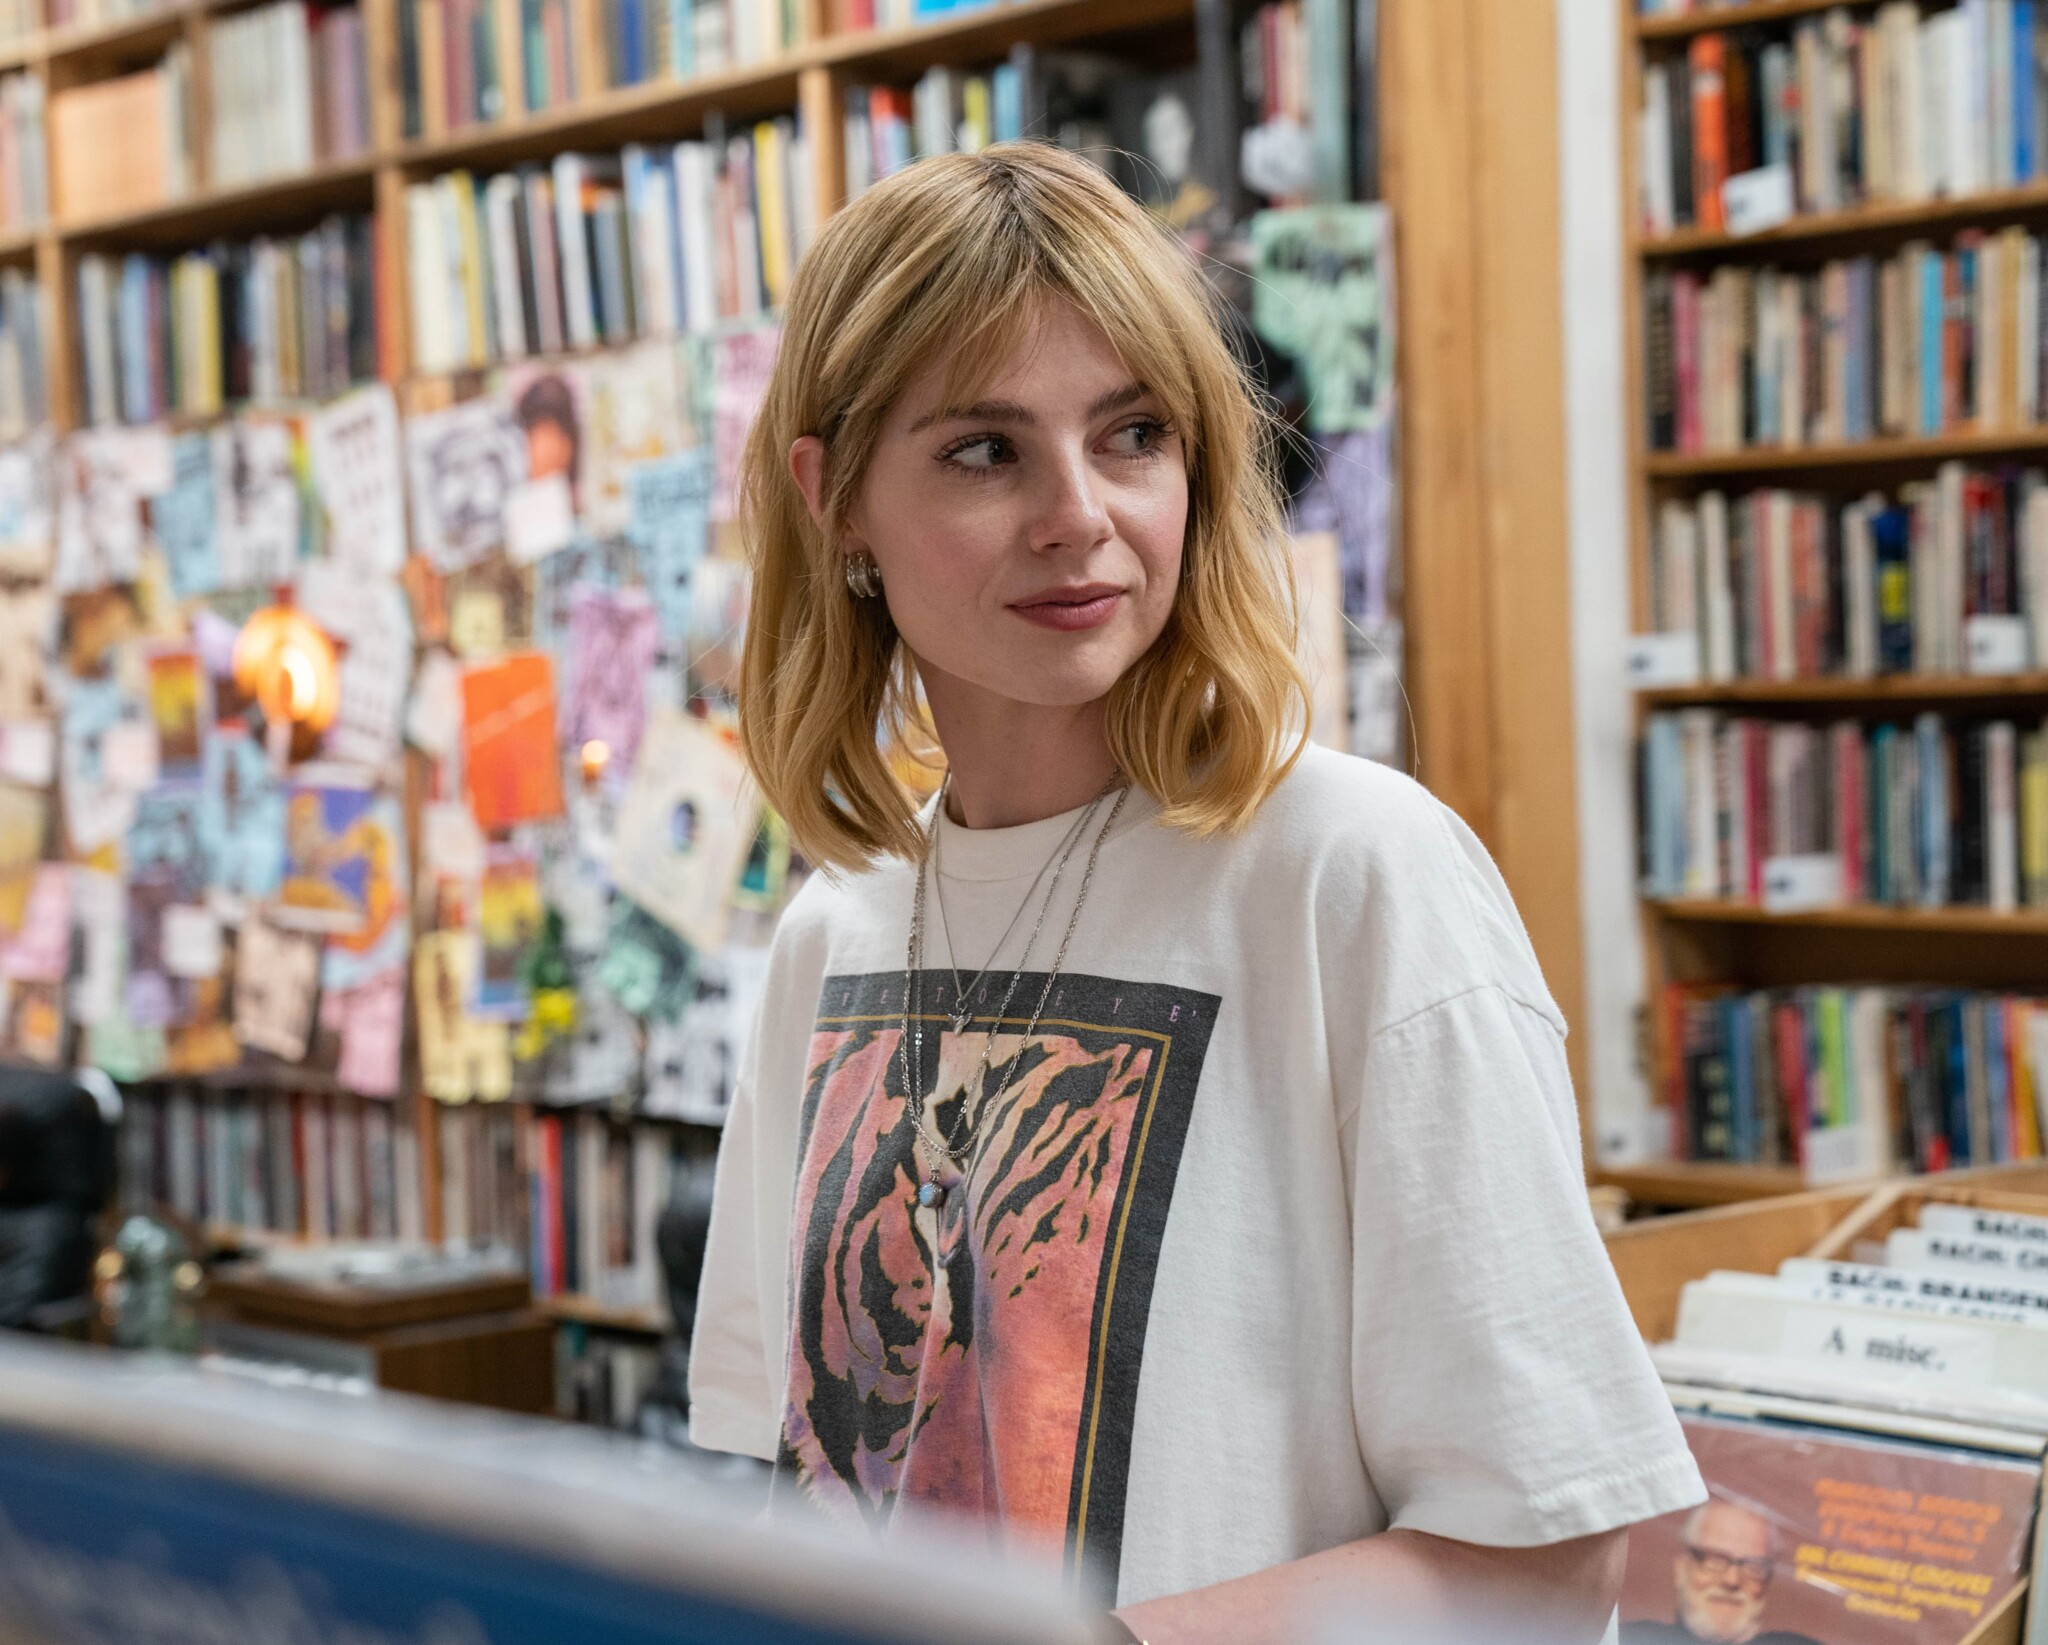 Lucy Boynton in "The Greatest Hits" stands in a record shop.